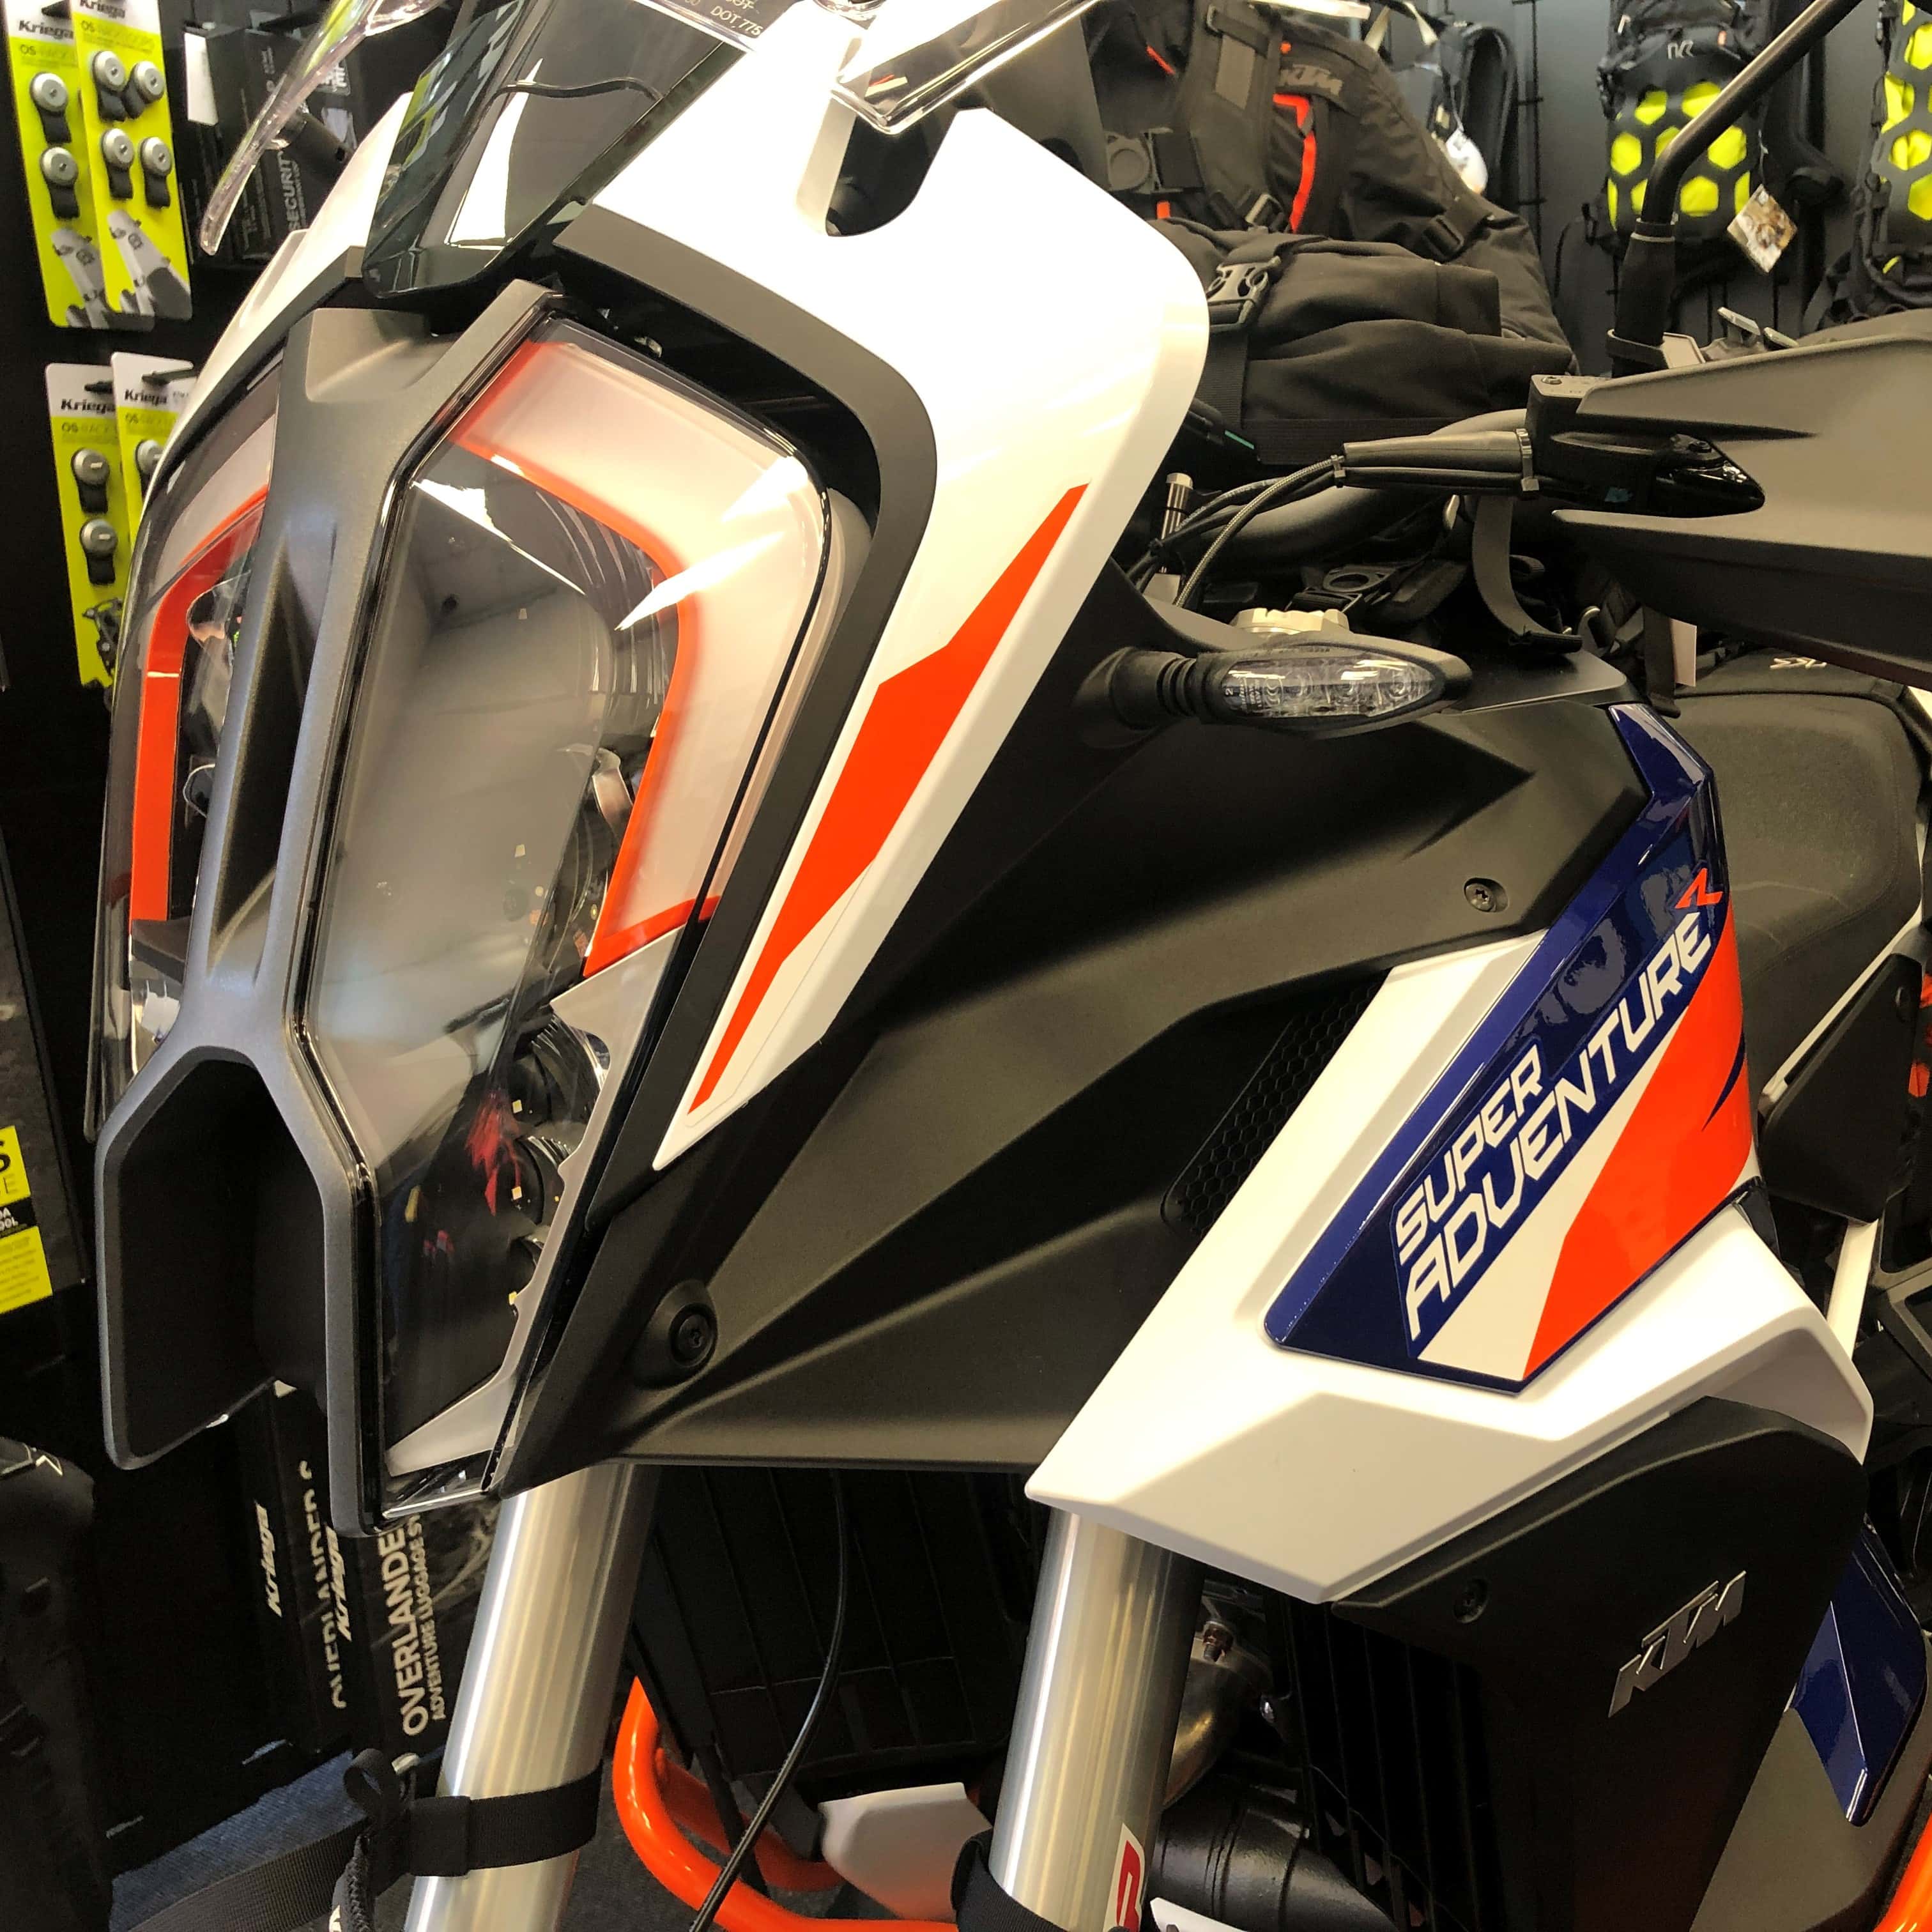 Laguna Exclusive KTM Super Adventure R with free tech pack and Kriega luggage